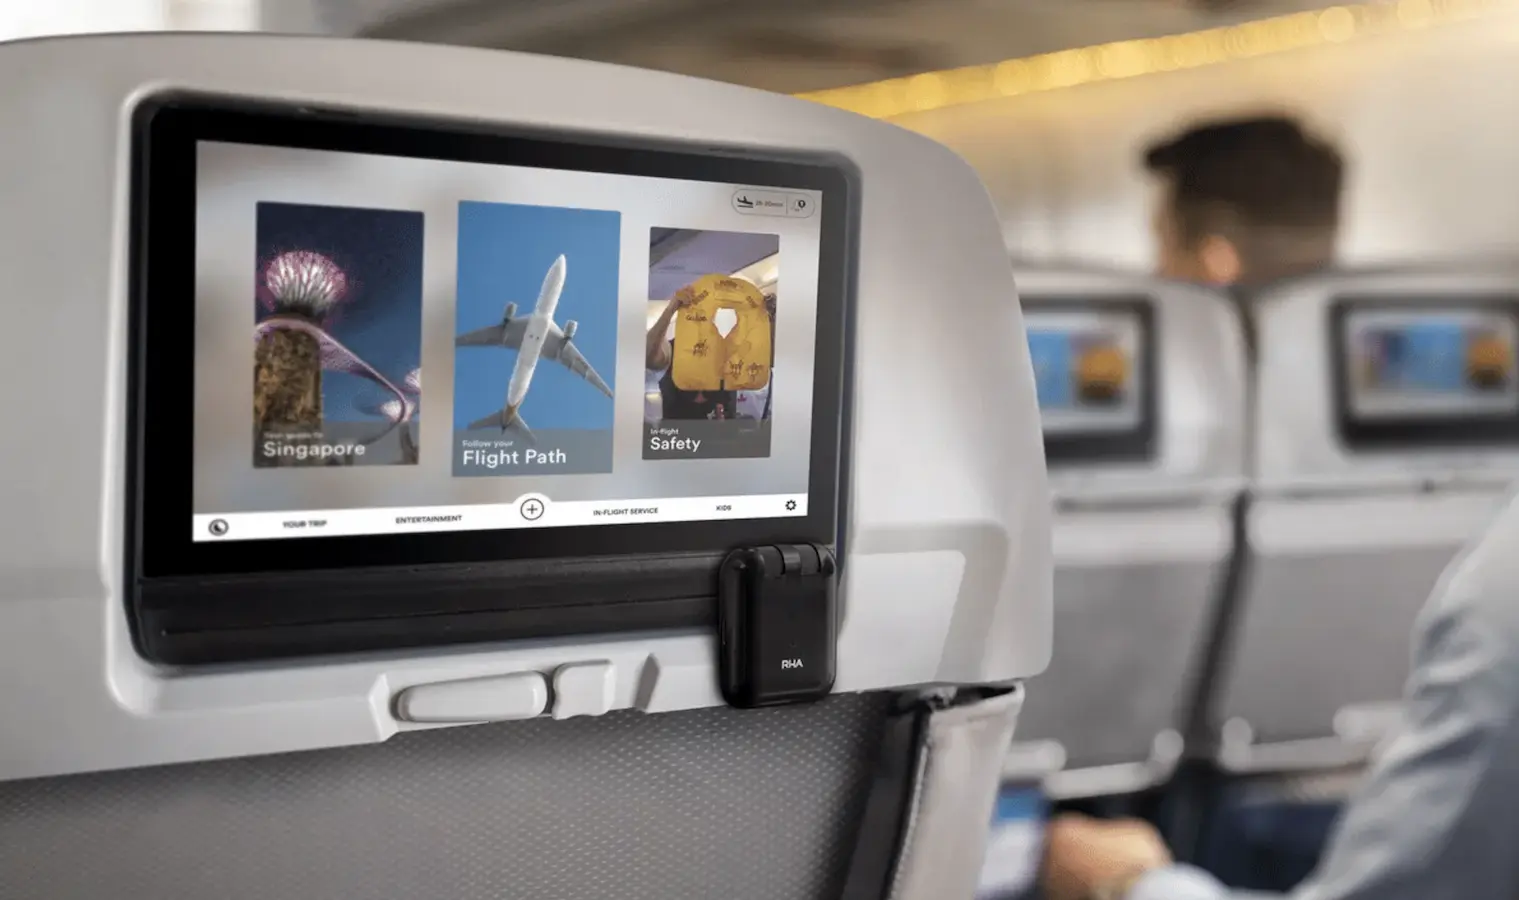 Can you use AirPods on in-flight TVs?